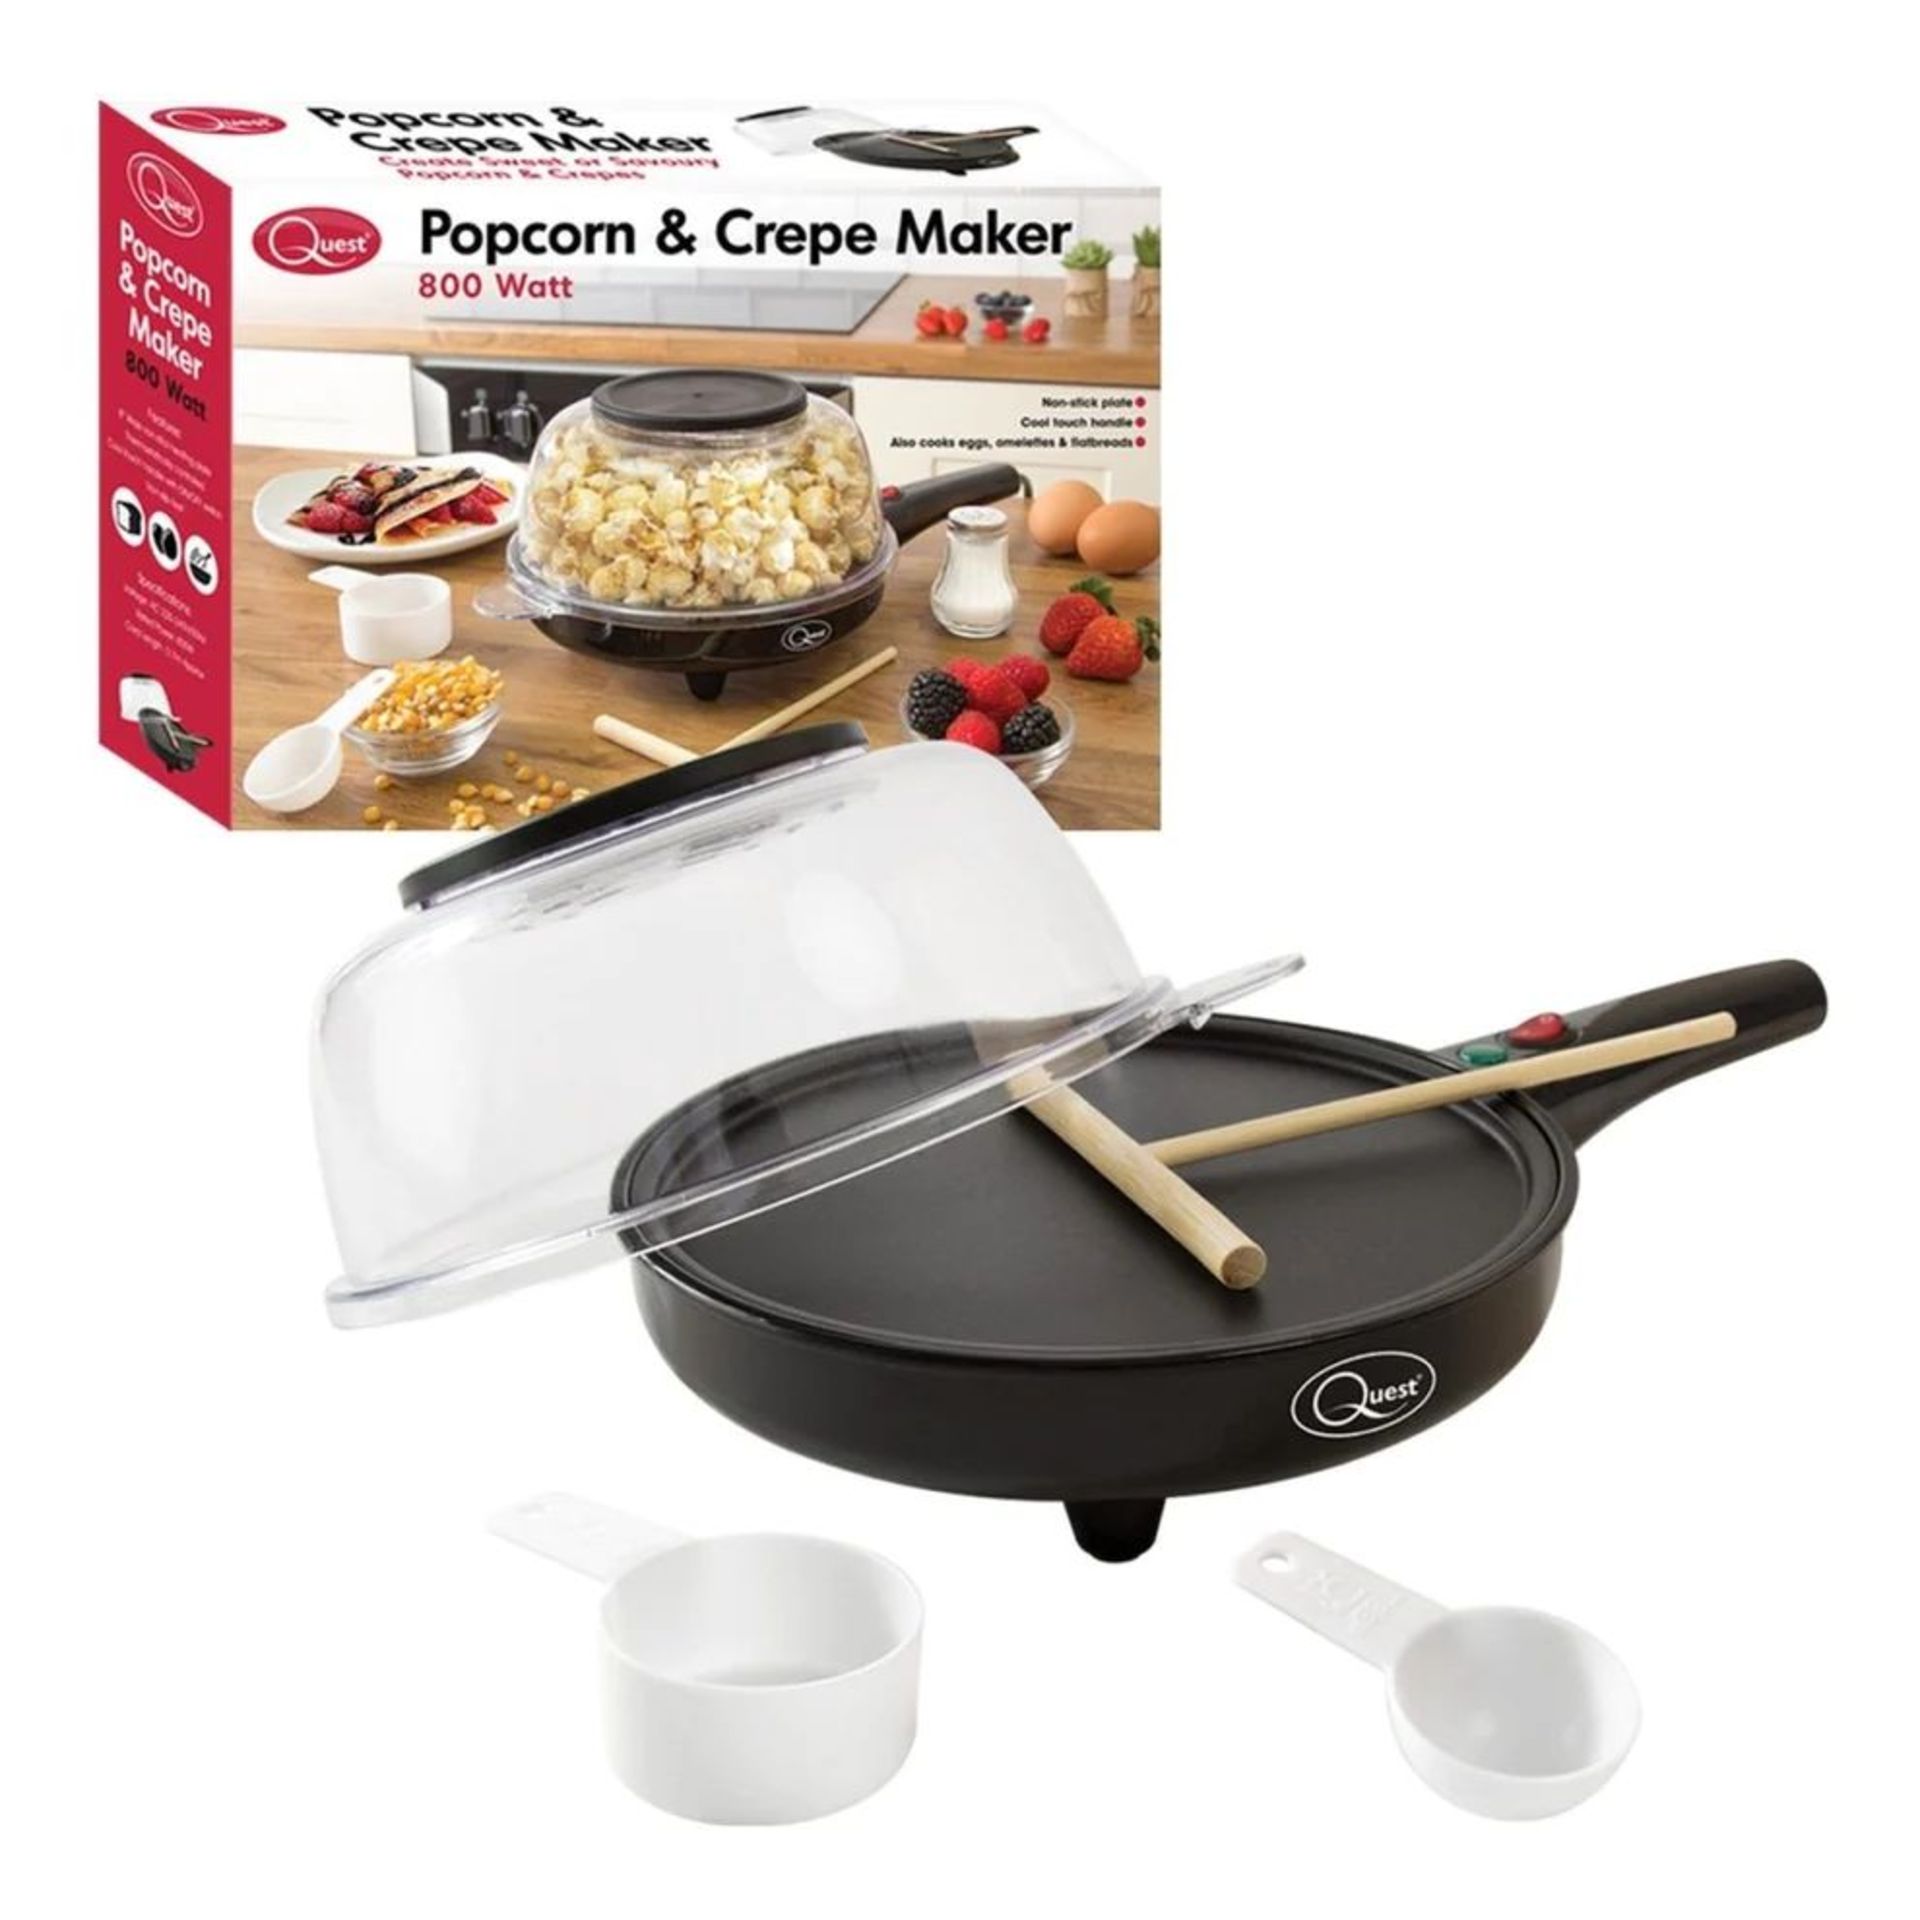 2 X NEW BOXED QUEST POPCORN & CREPE MAKERS. 800W. COOL TOUCH HANDLE. NON-STICK PLATES, ANTI SLIP